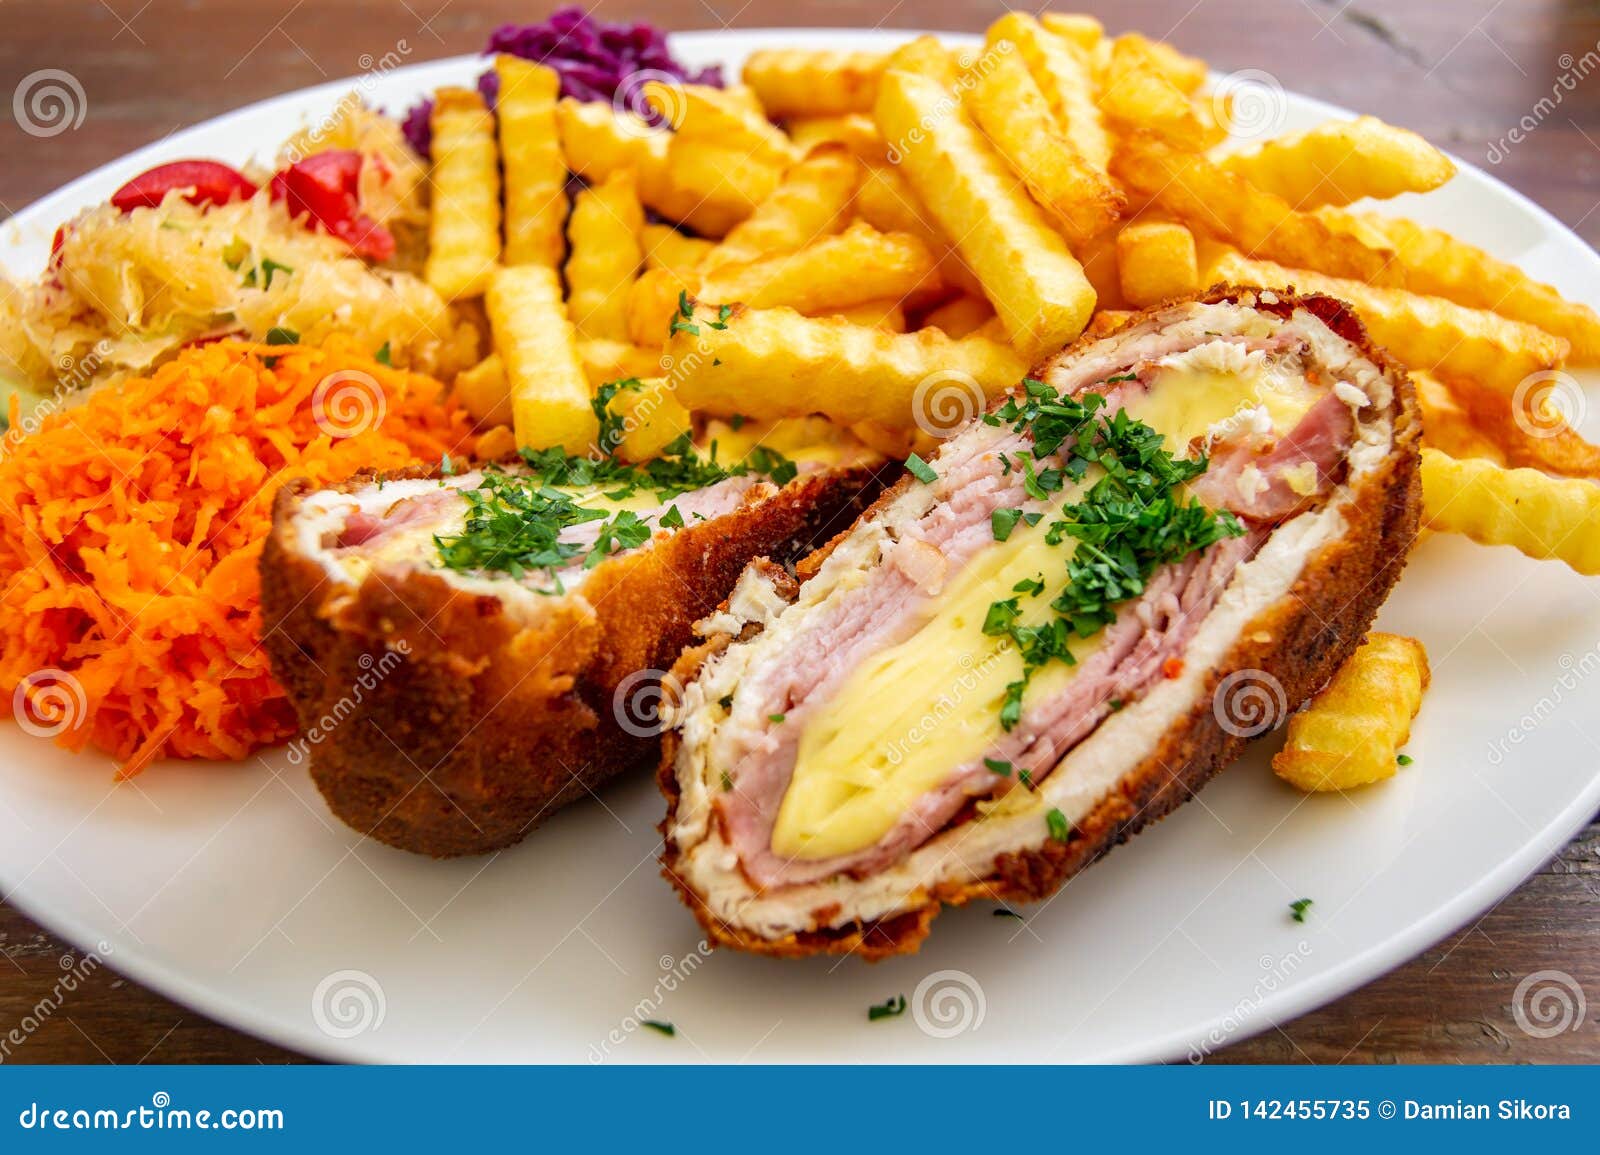 pork devolay. chop de volaille, chicken breast, chicken meat with cheese, french fries, salads